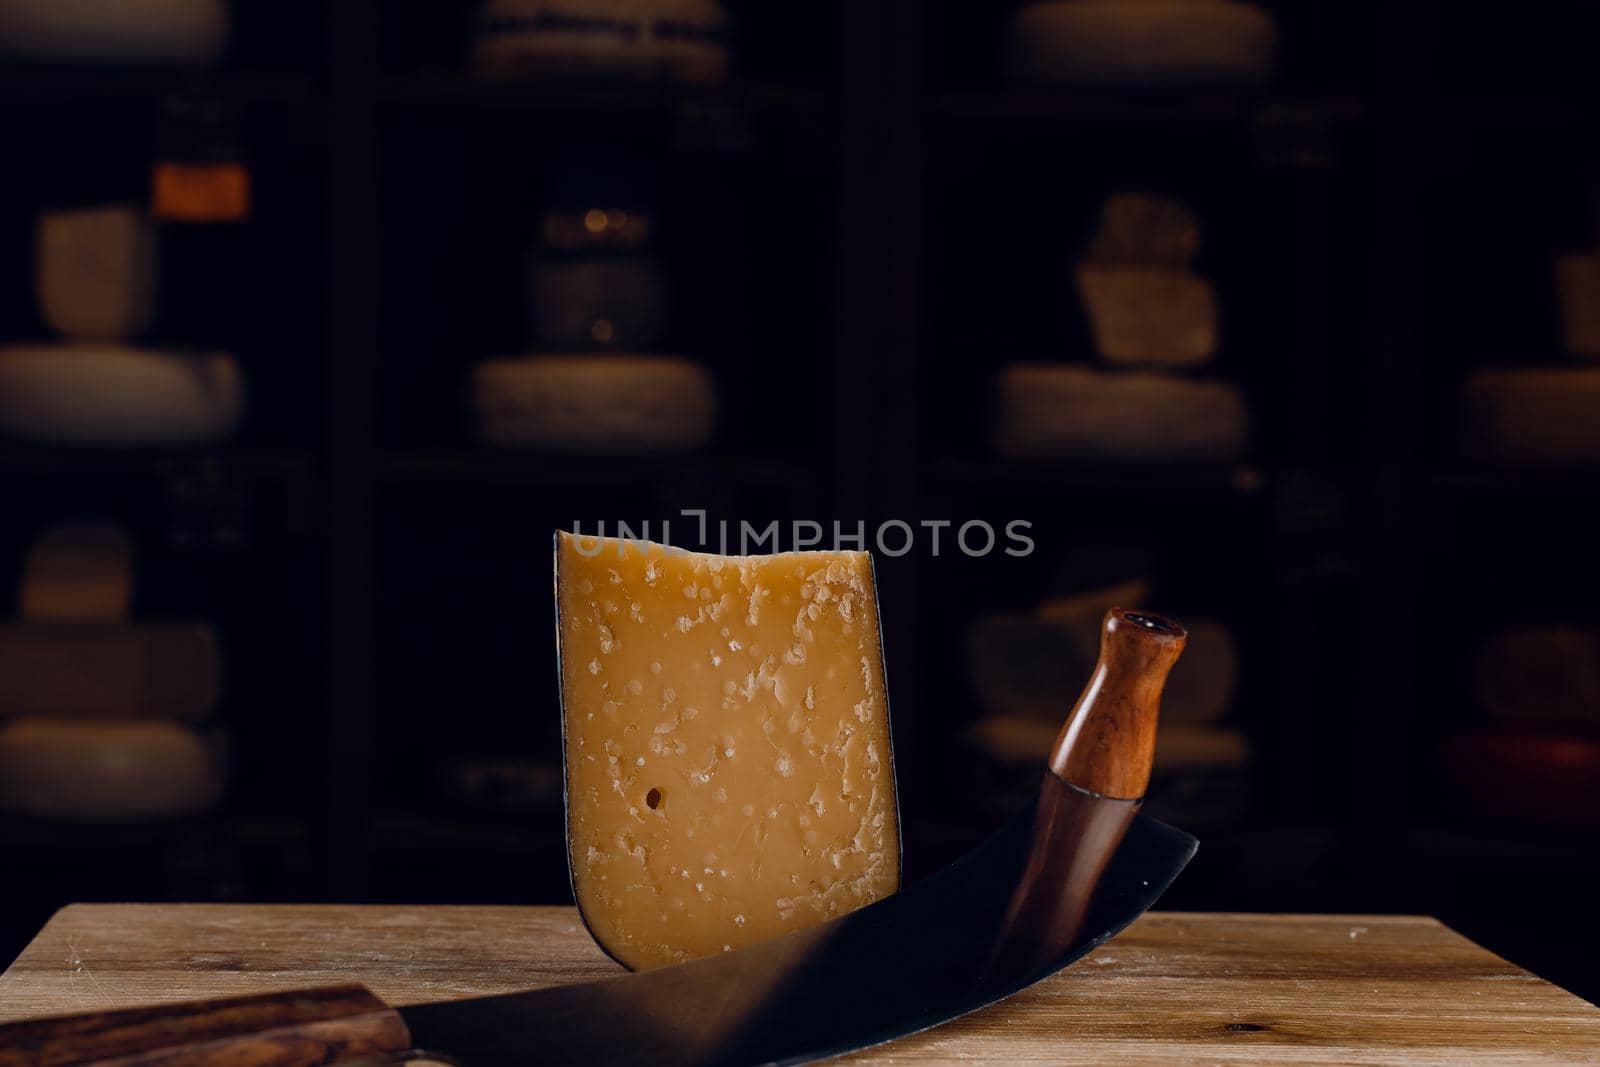 Parmesan hard aged cheese with dutch cheese knife on dark background. Snack tasty piece of cheese for appetizer